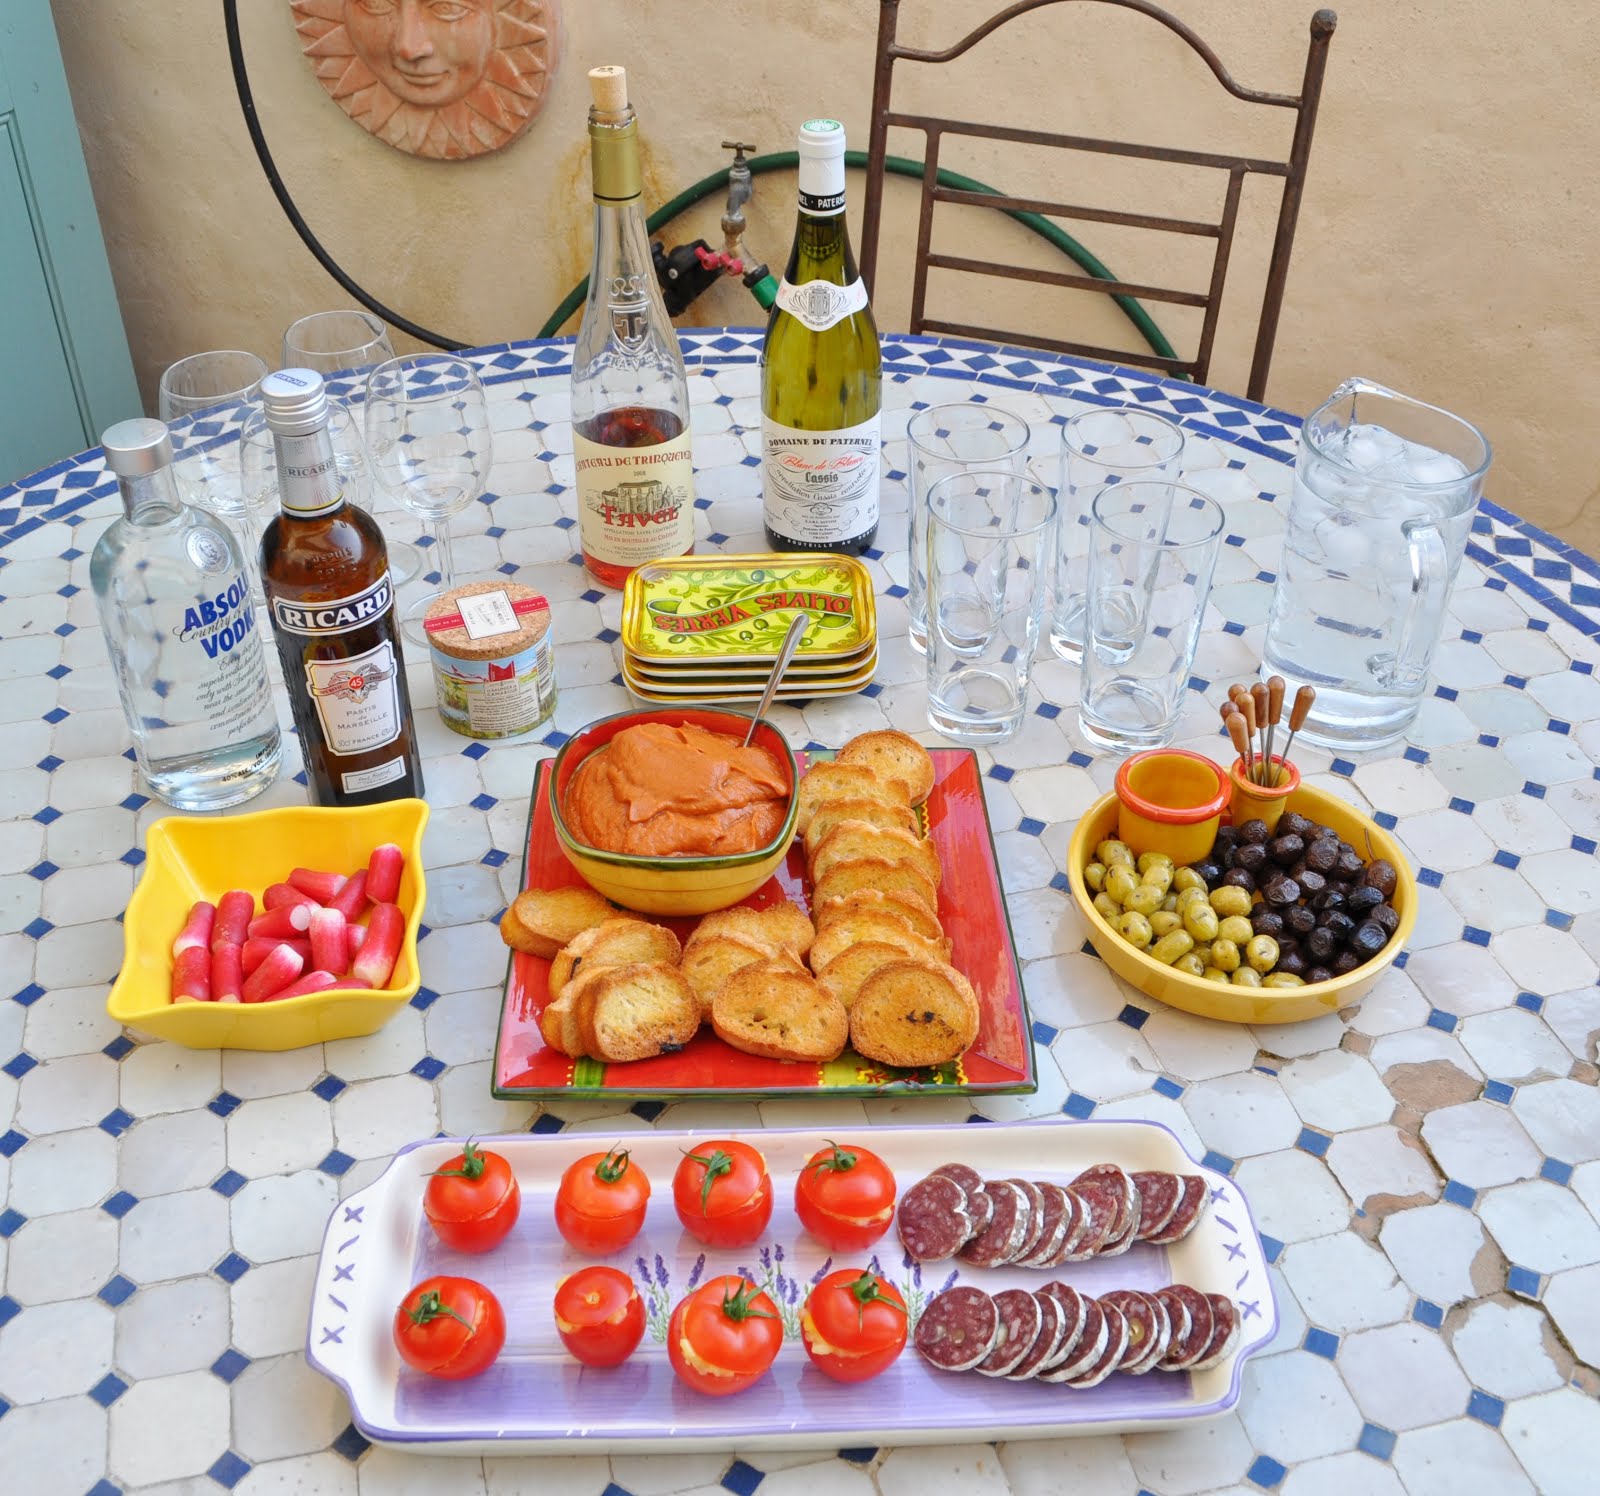 Our House in Provence: Aperitif, a Wonderful French Custom.